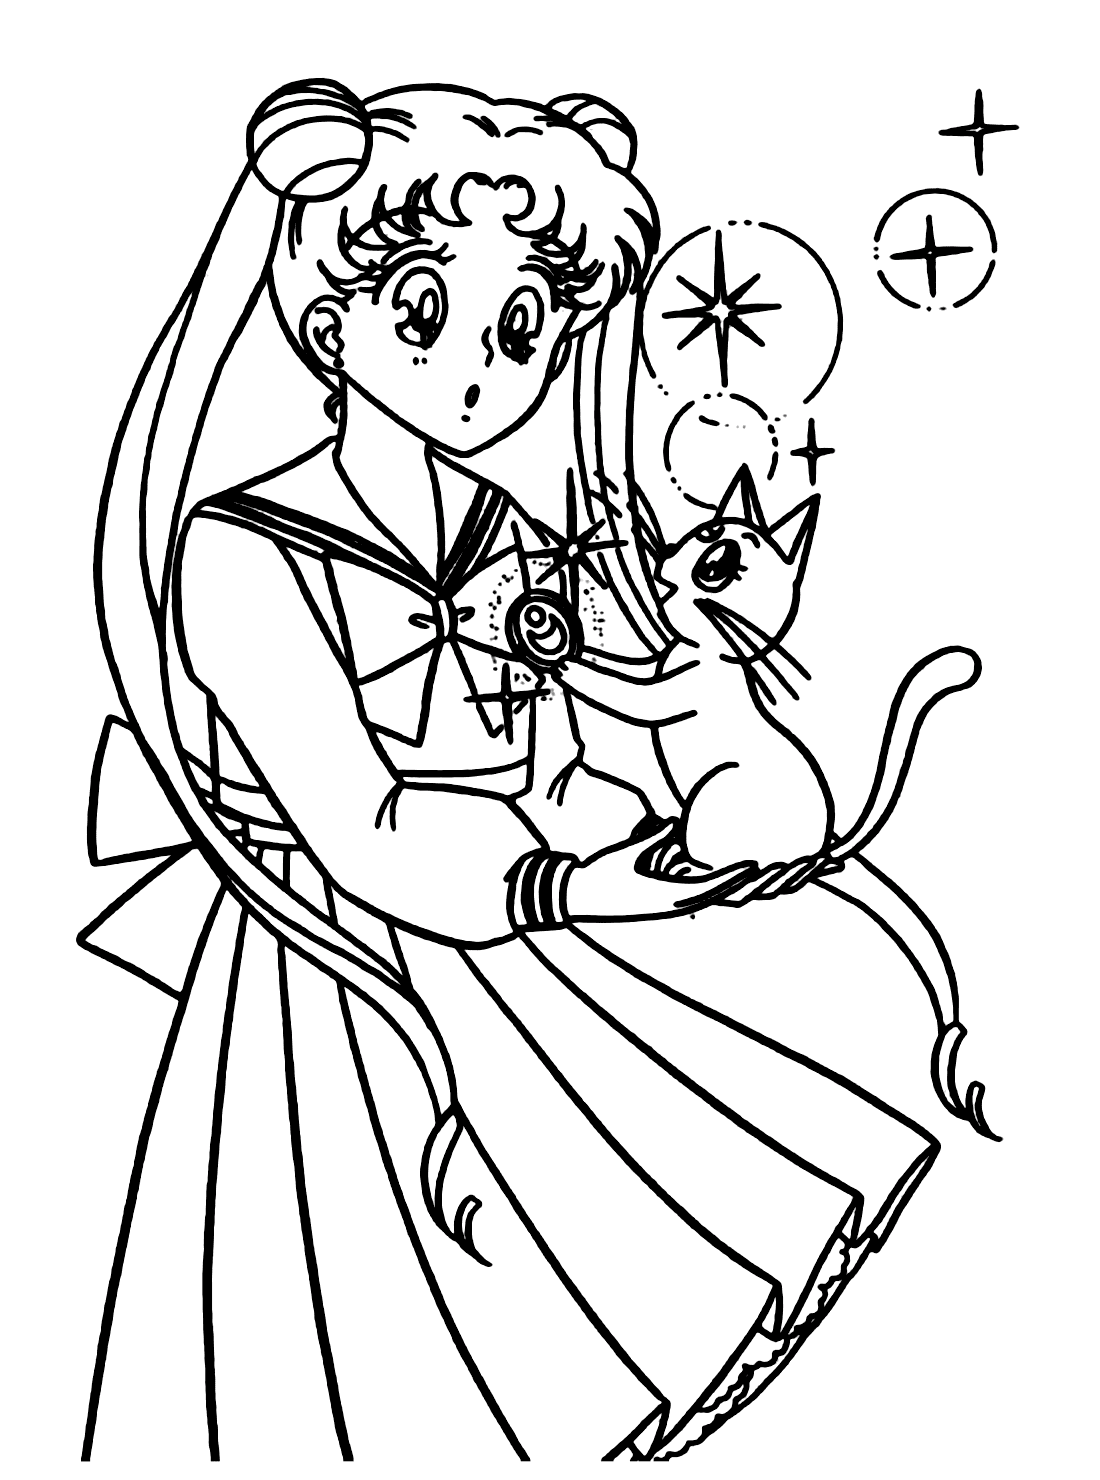 All Sailor Moon Characters Coloring Page